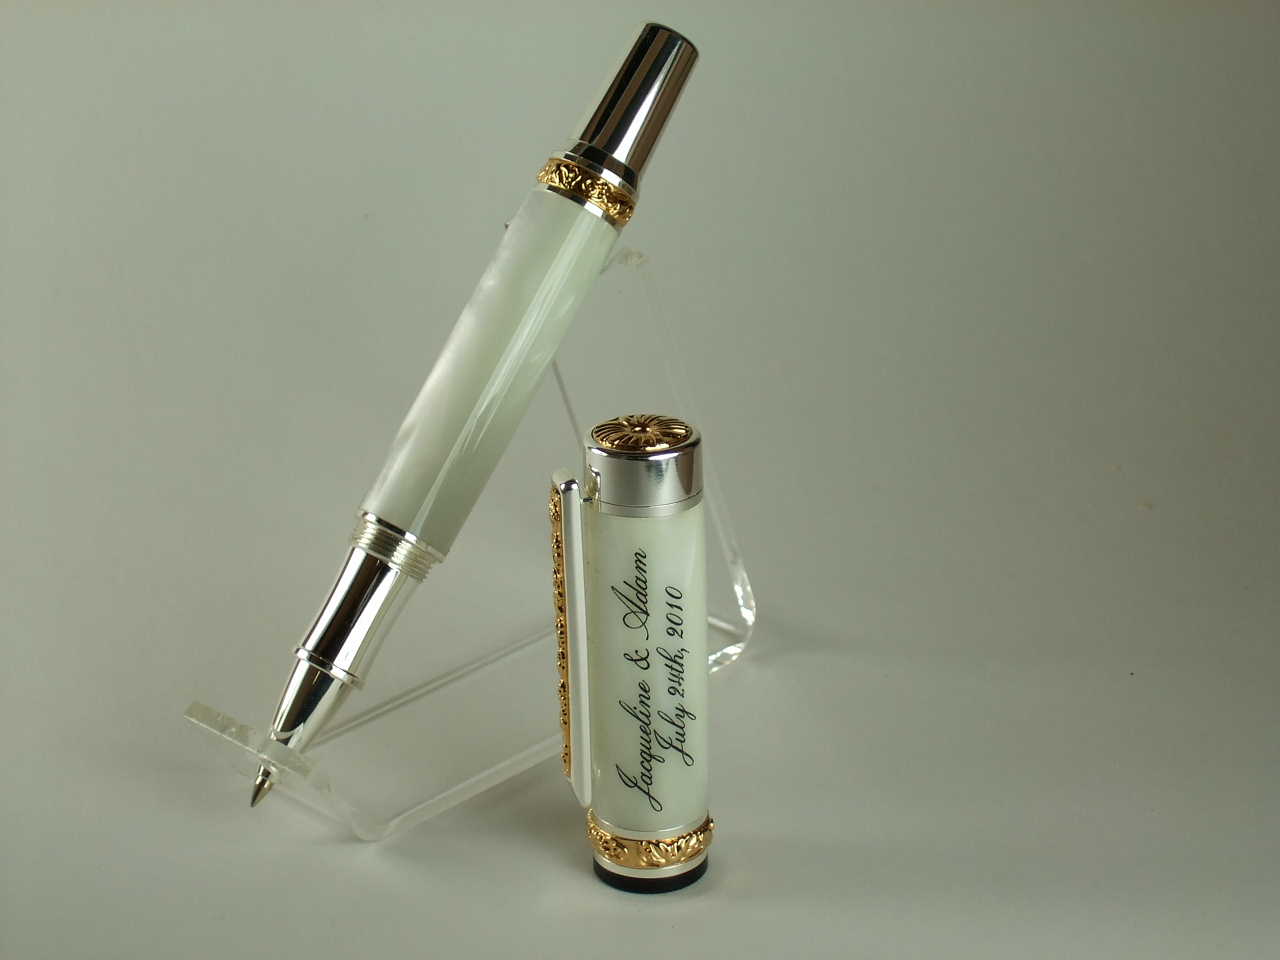 Wedding pen made for some friends. Sterling silver & gold titanium with a white pearl body. Looks awesome in person.